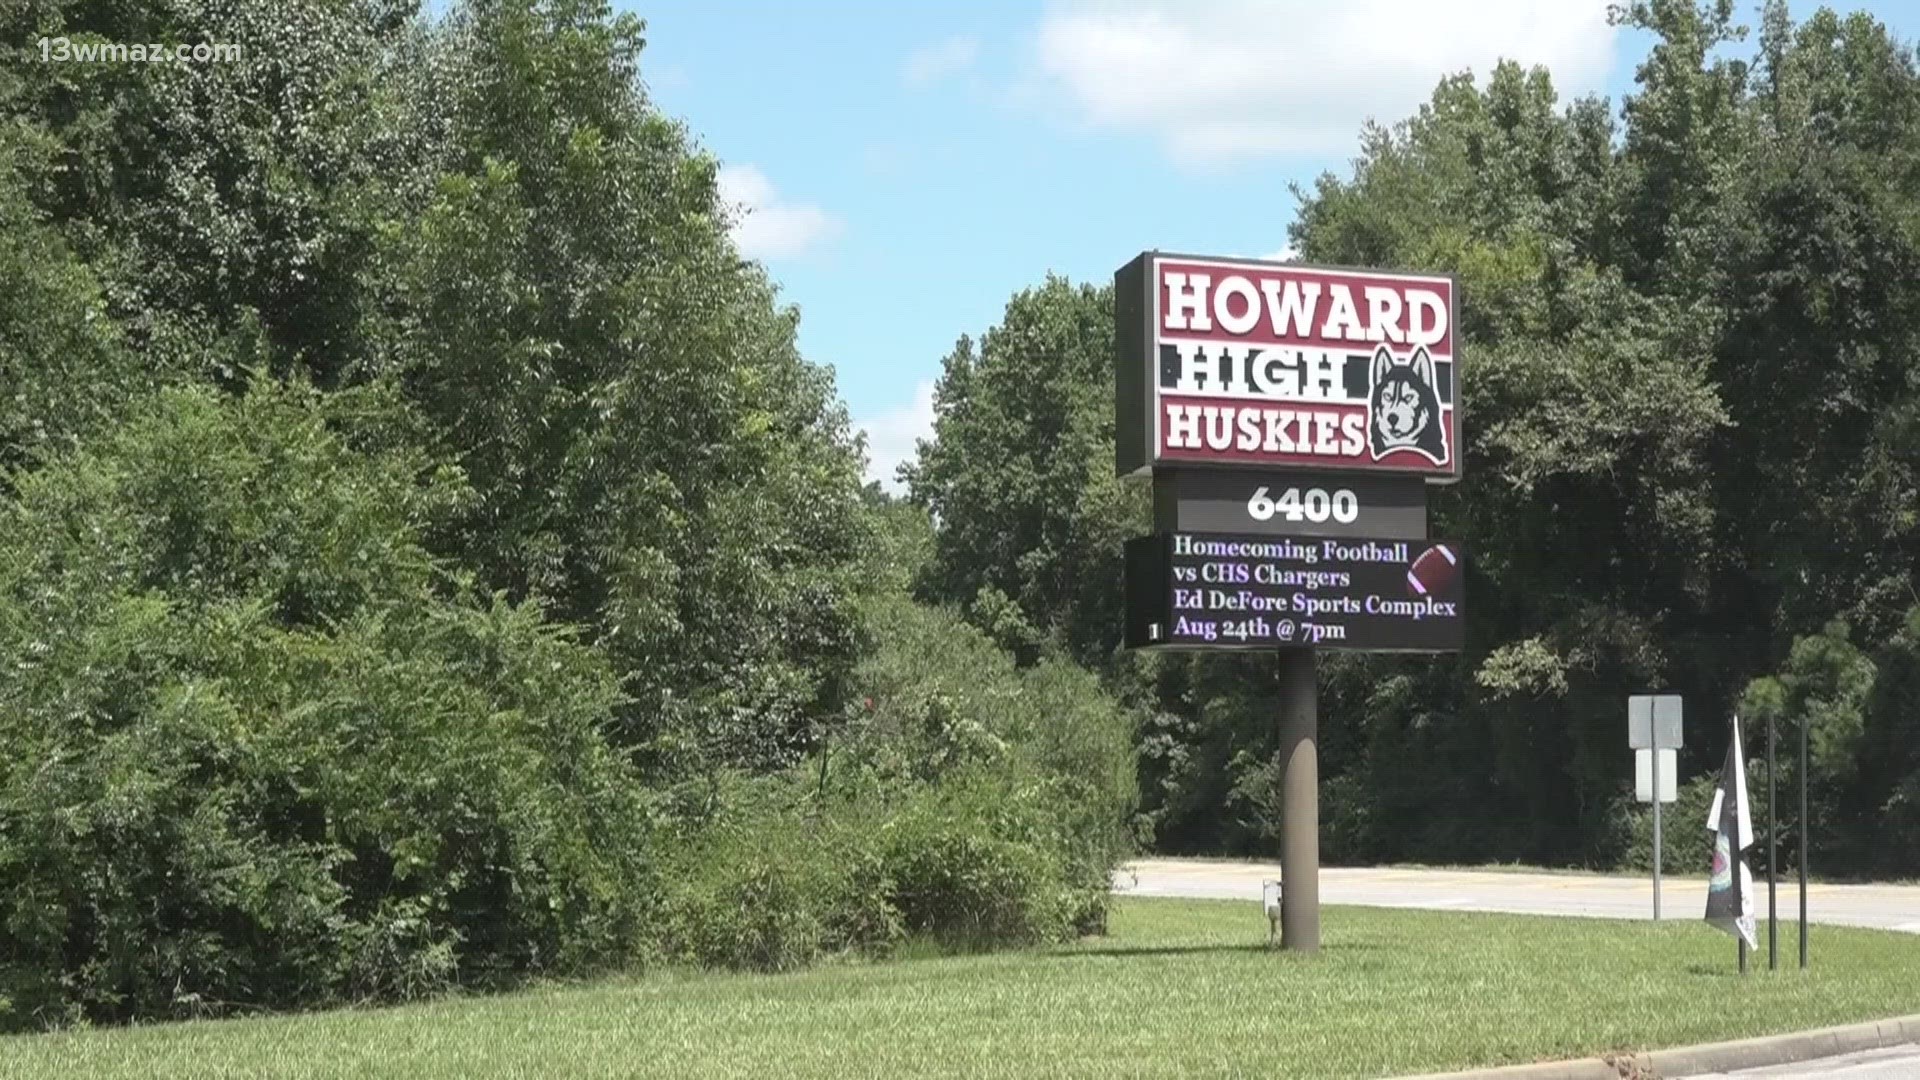 Rachael Cox says her daughter goes to Howard High School. But on the first day of school, the bus app caused some difficulties for her daughter.